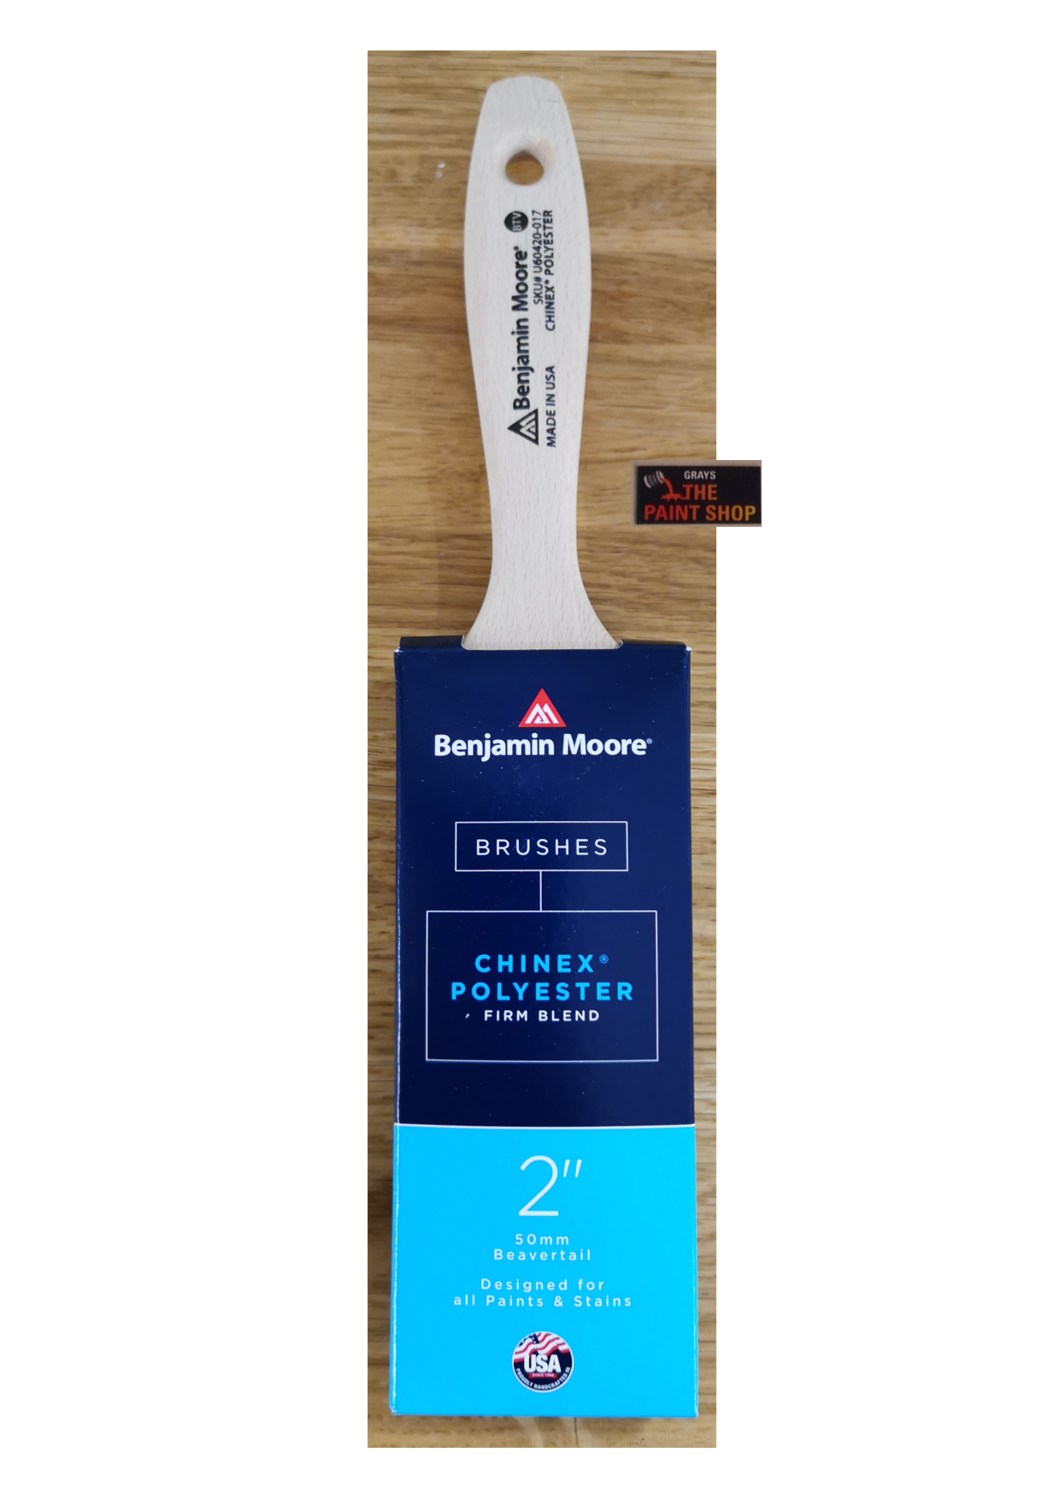 Benjamin Moore Craftsman 603 Long Handle Range Brush 2", 2.5" & 3" (click here to select size) Prices From, Size: 2" (60320)